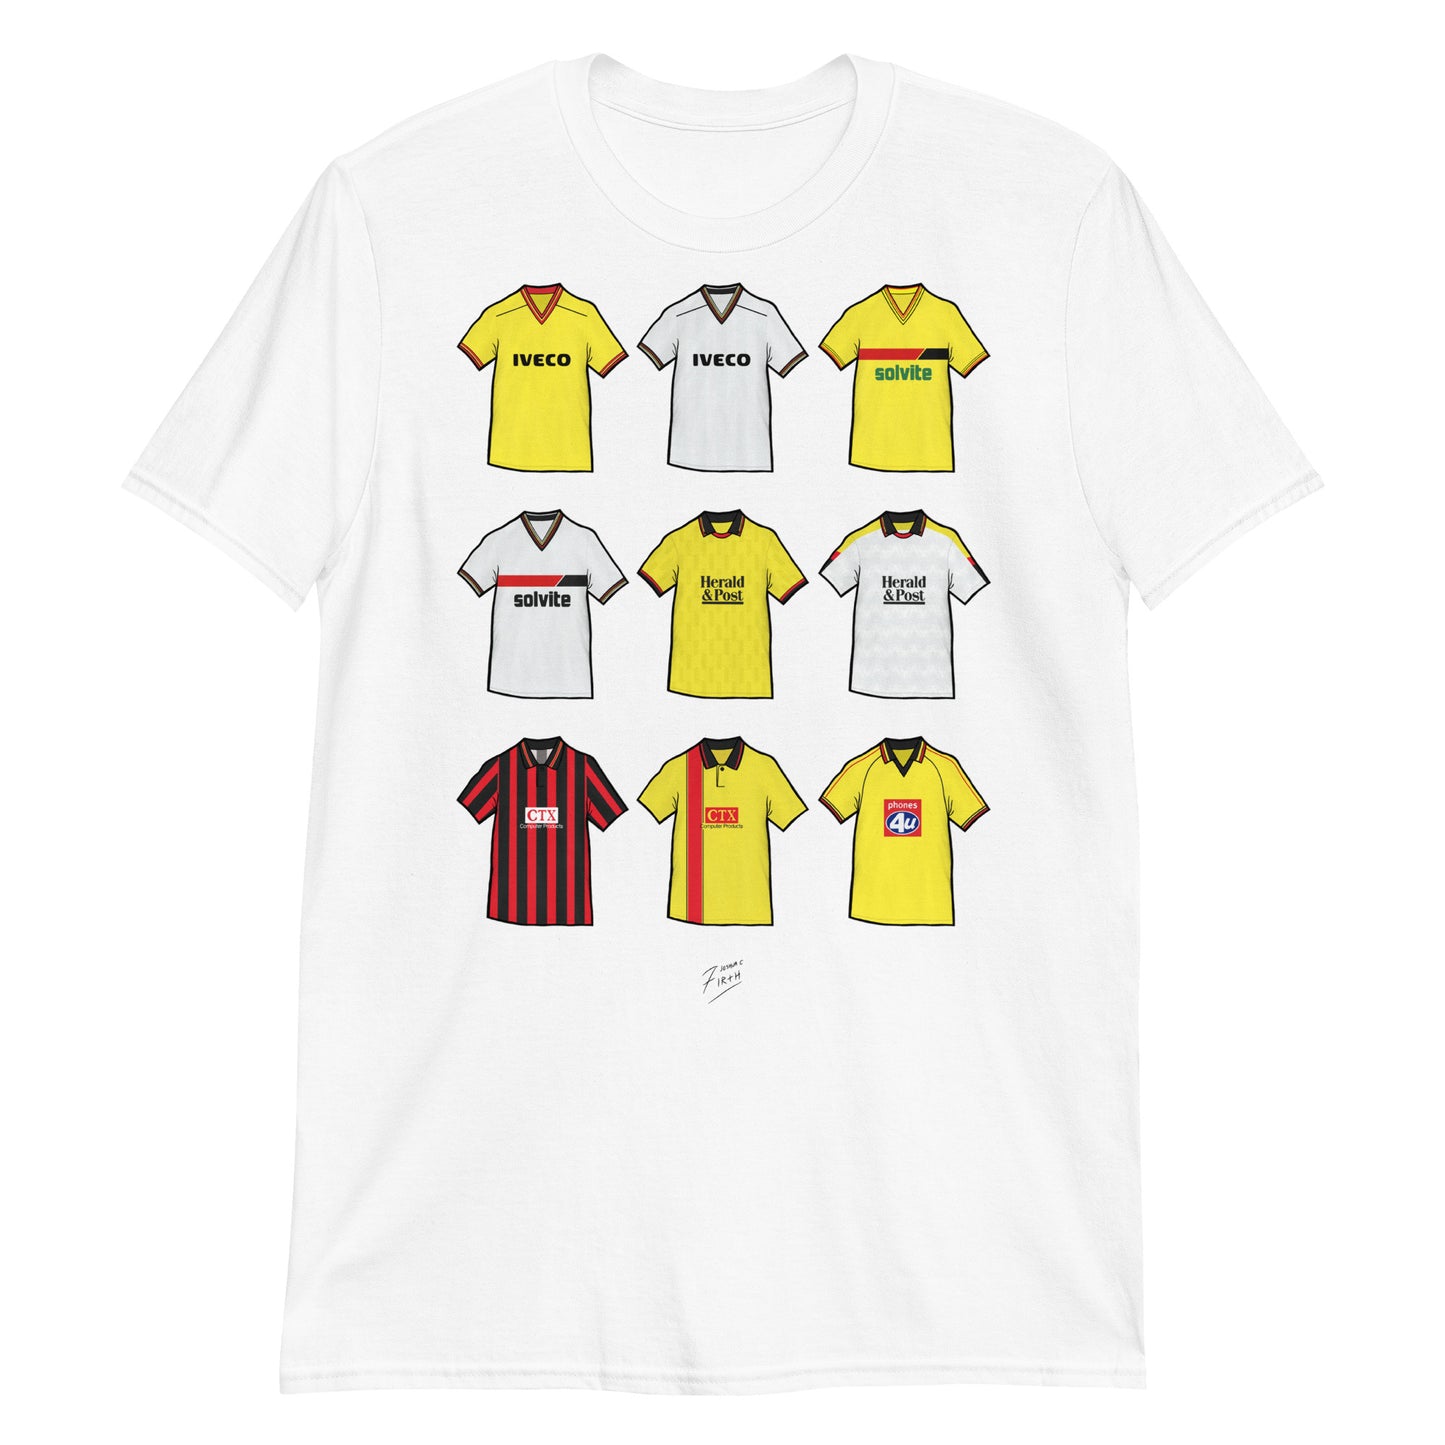 White Watford themed football t-shirts inspired by their retro jerseys of the past!